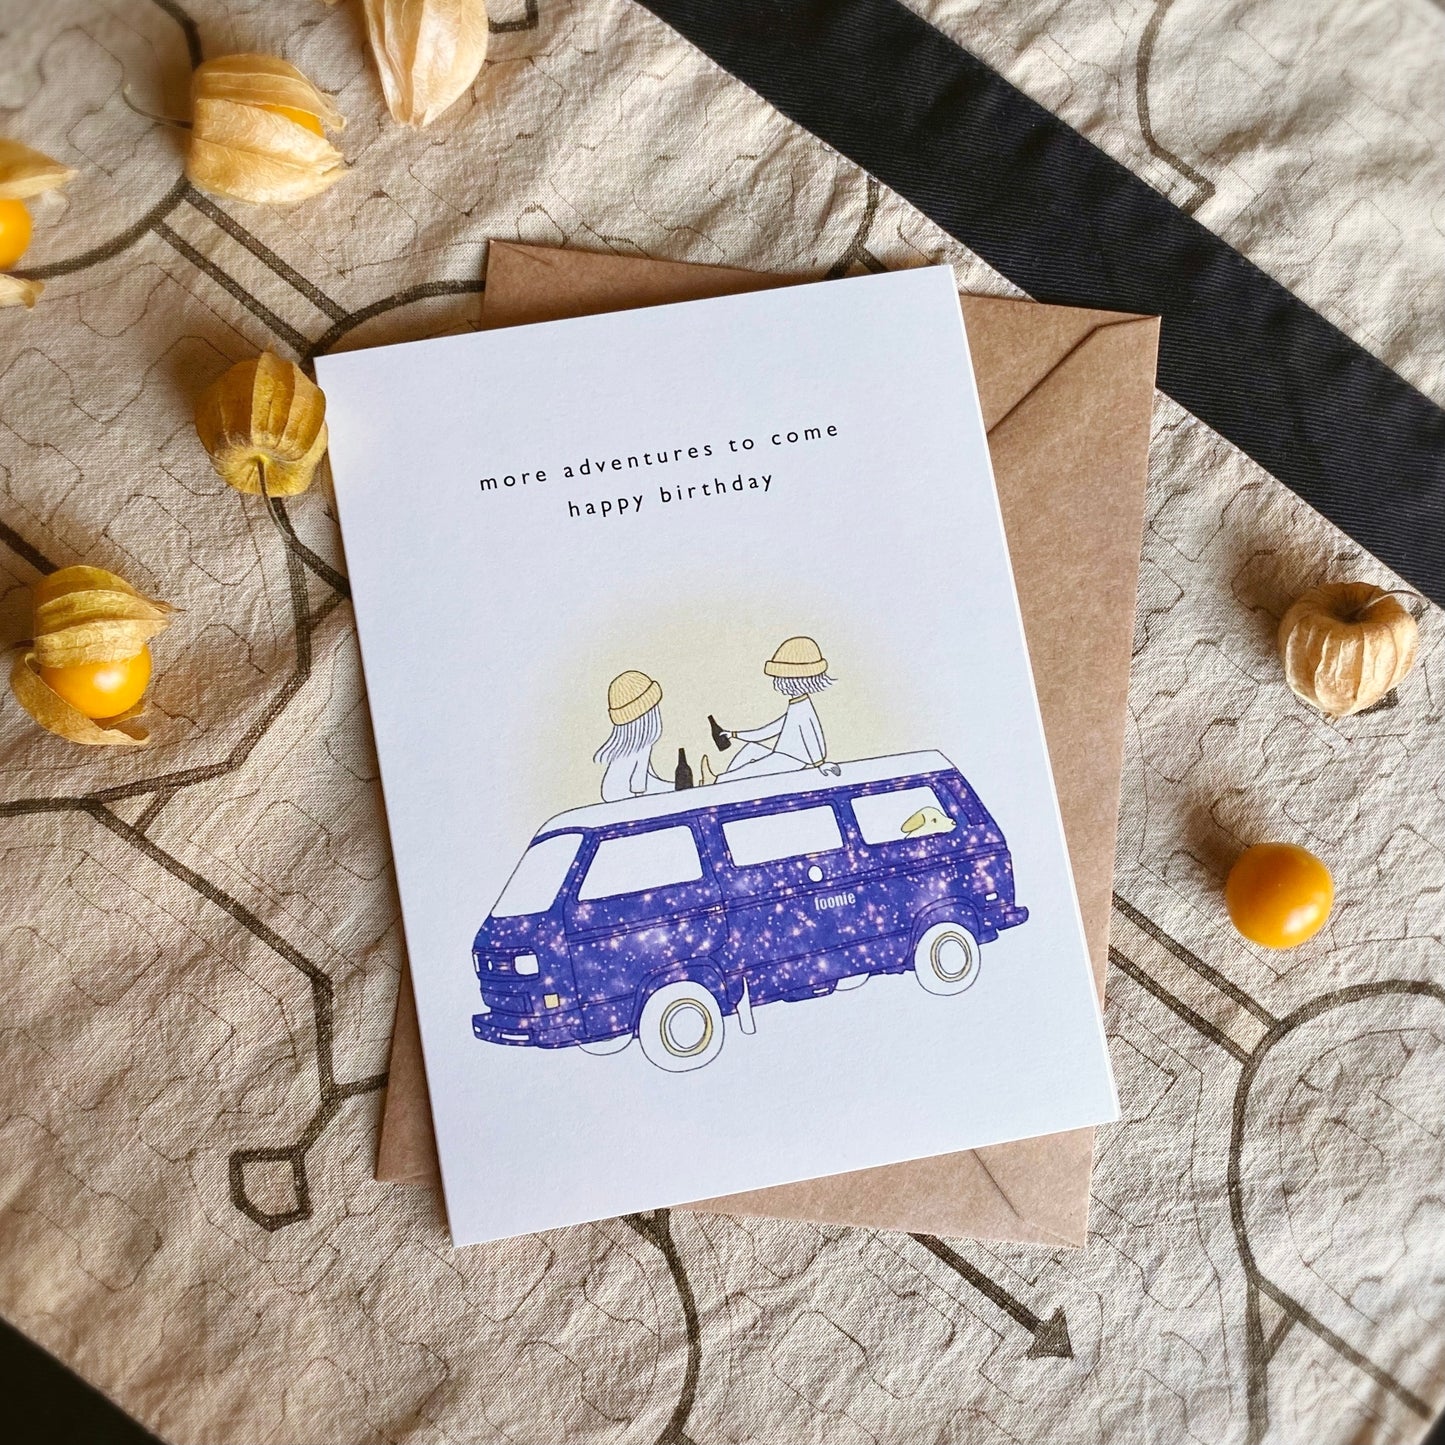 Outdoorsy Birthday Card set with the illustration of two people wearing toques on a vintage camper van